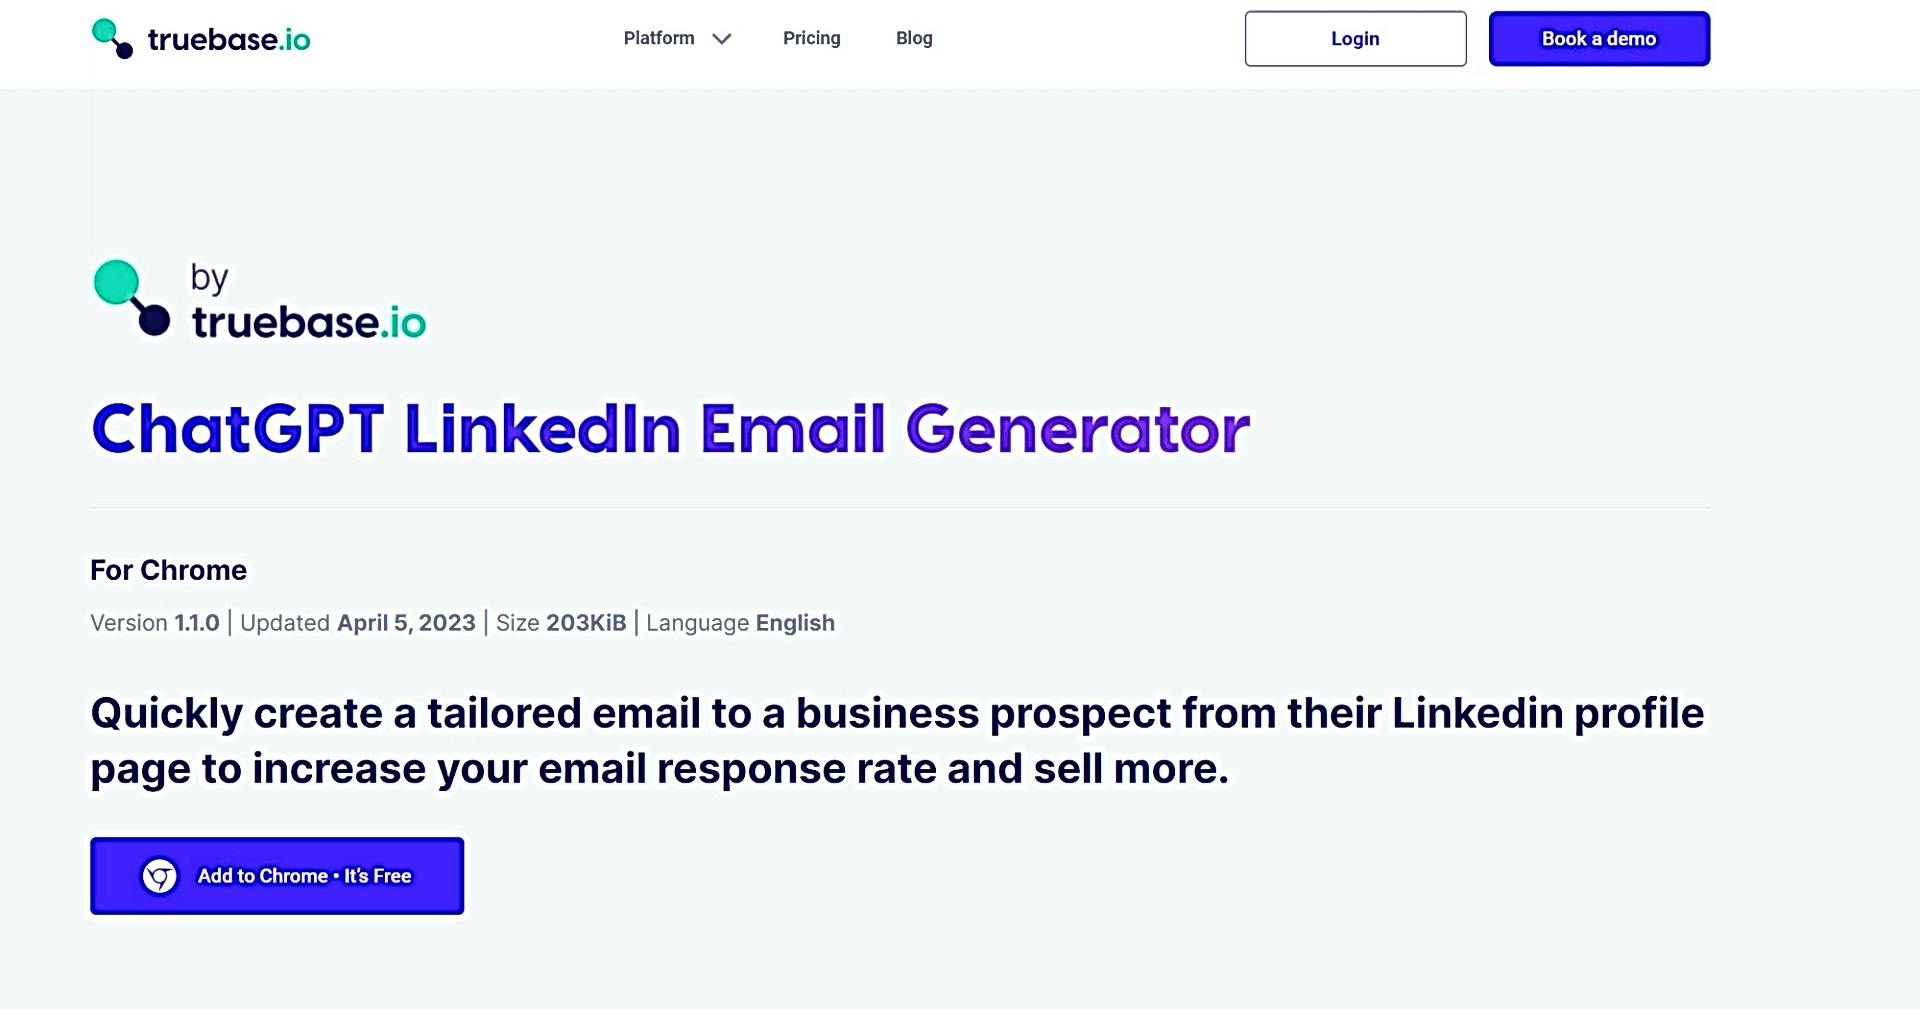 ChatGPT LinkedIn Email Generator featured